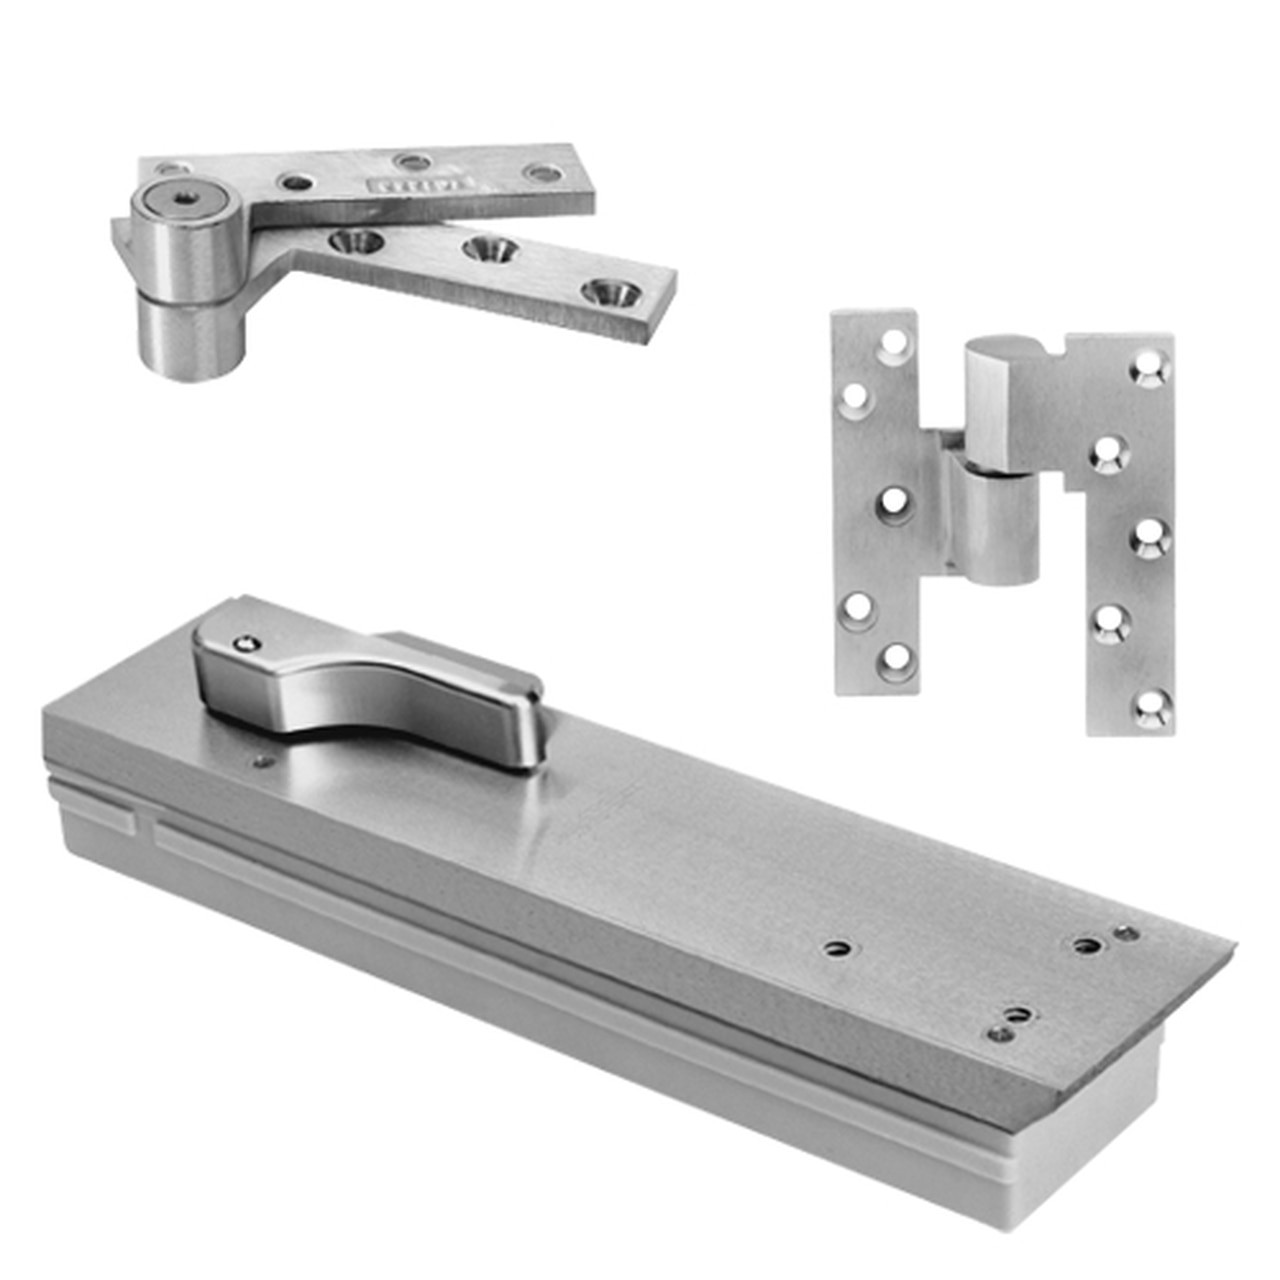 FQ5105NBC-LFP-LCC-LH-626 Rixson Q51 Series Fire Rated 3/4" Offset Hung Shallow Depth Floor Closers in Satin Chrome Finish